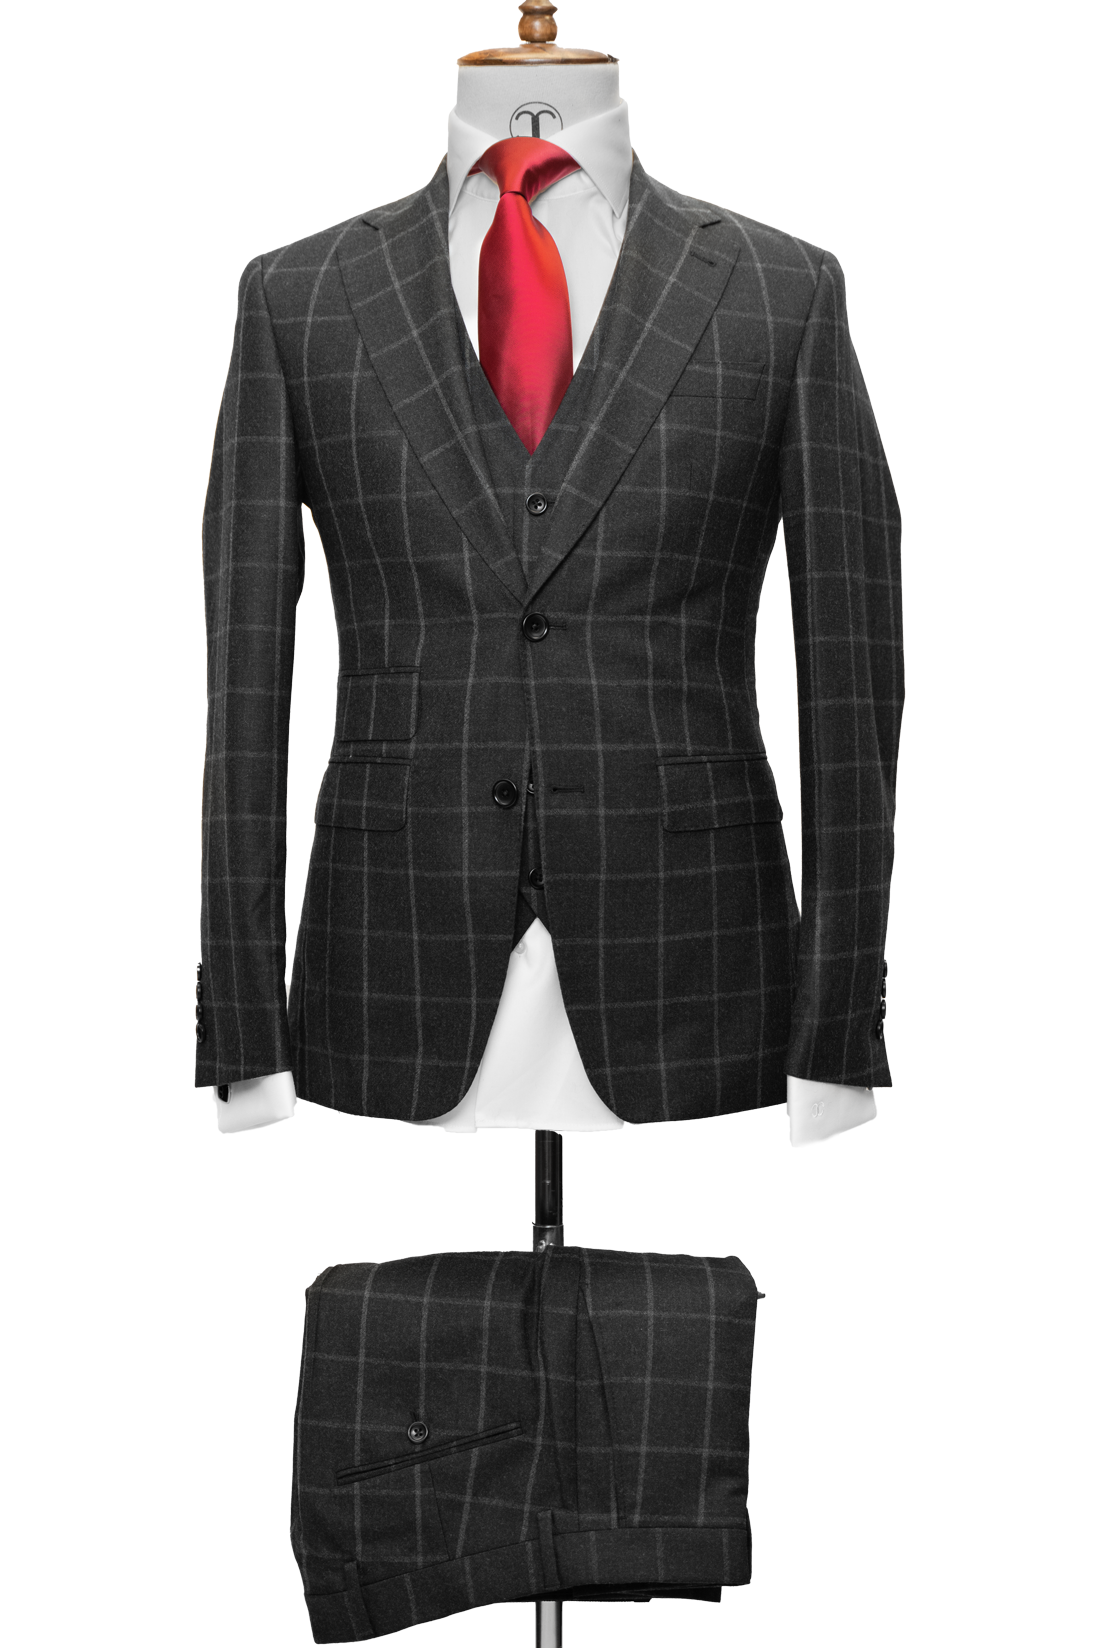 Zignone - Charcoal grey with chalk windowpane cashmere 3-piece slim fit suit